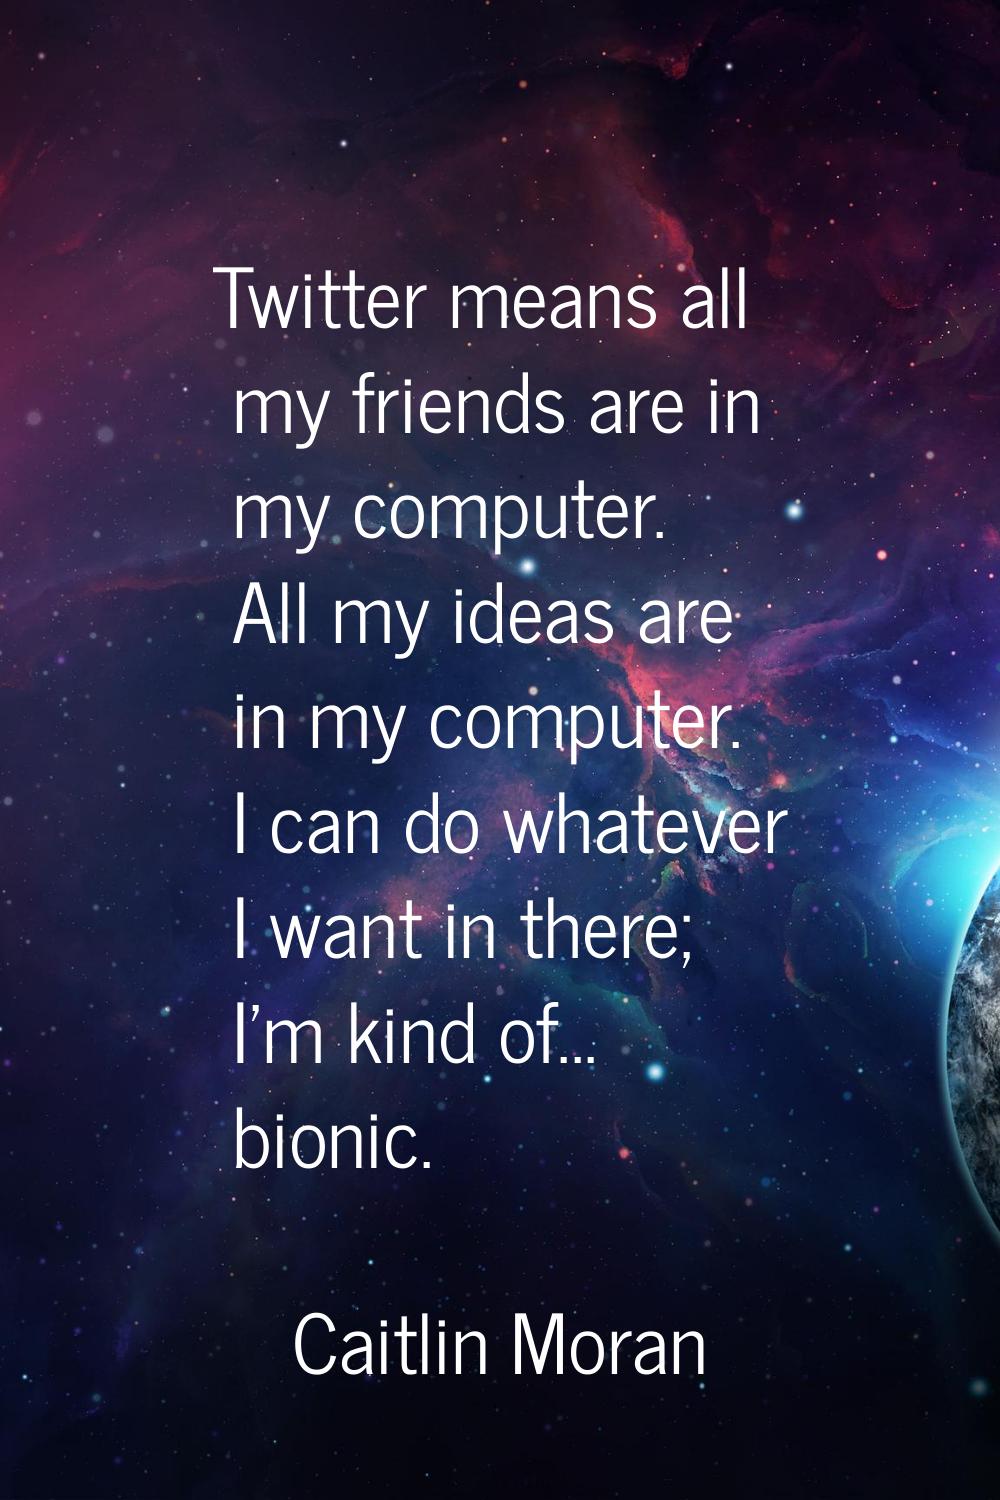 Twitter means all my friends are in my computer. All my ideas are in my computer. I can do whatever